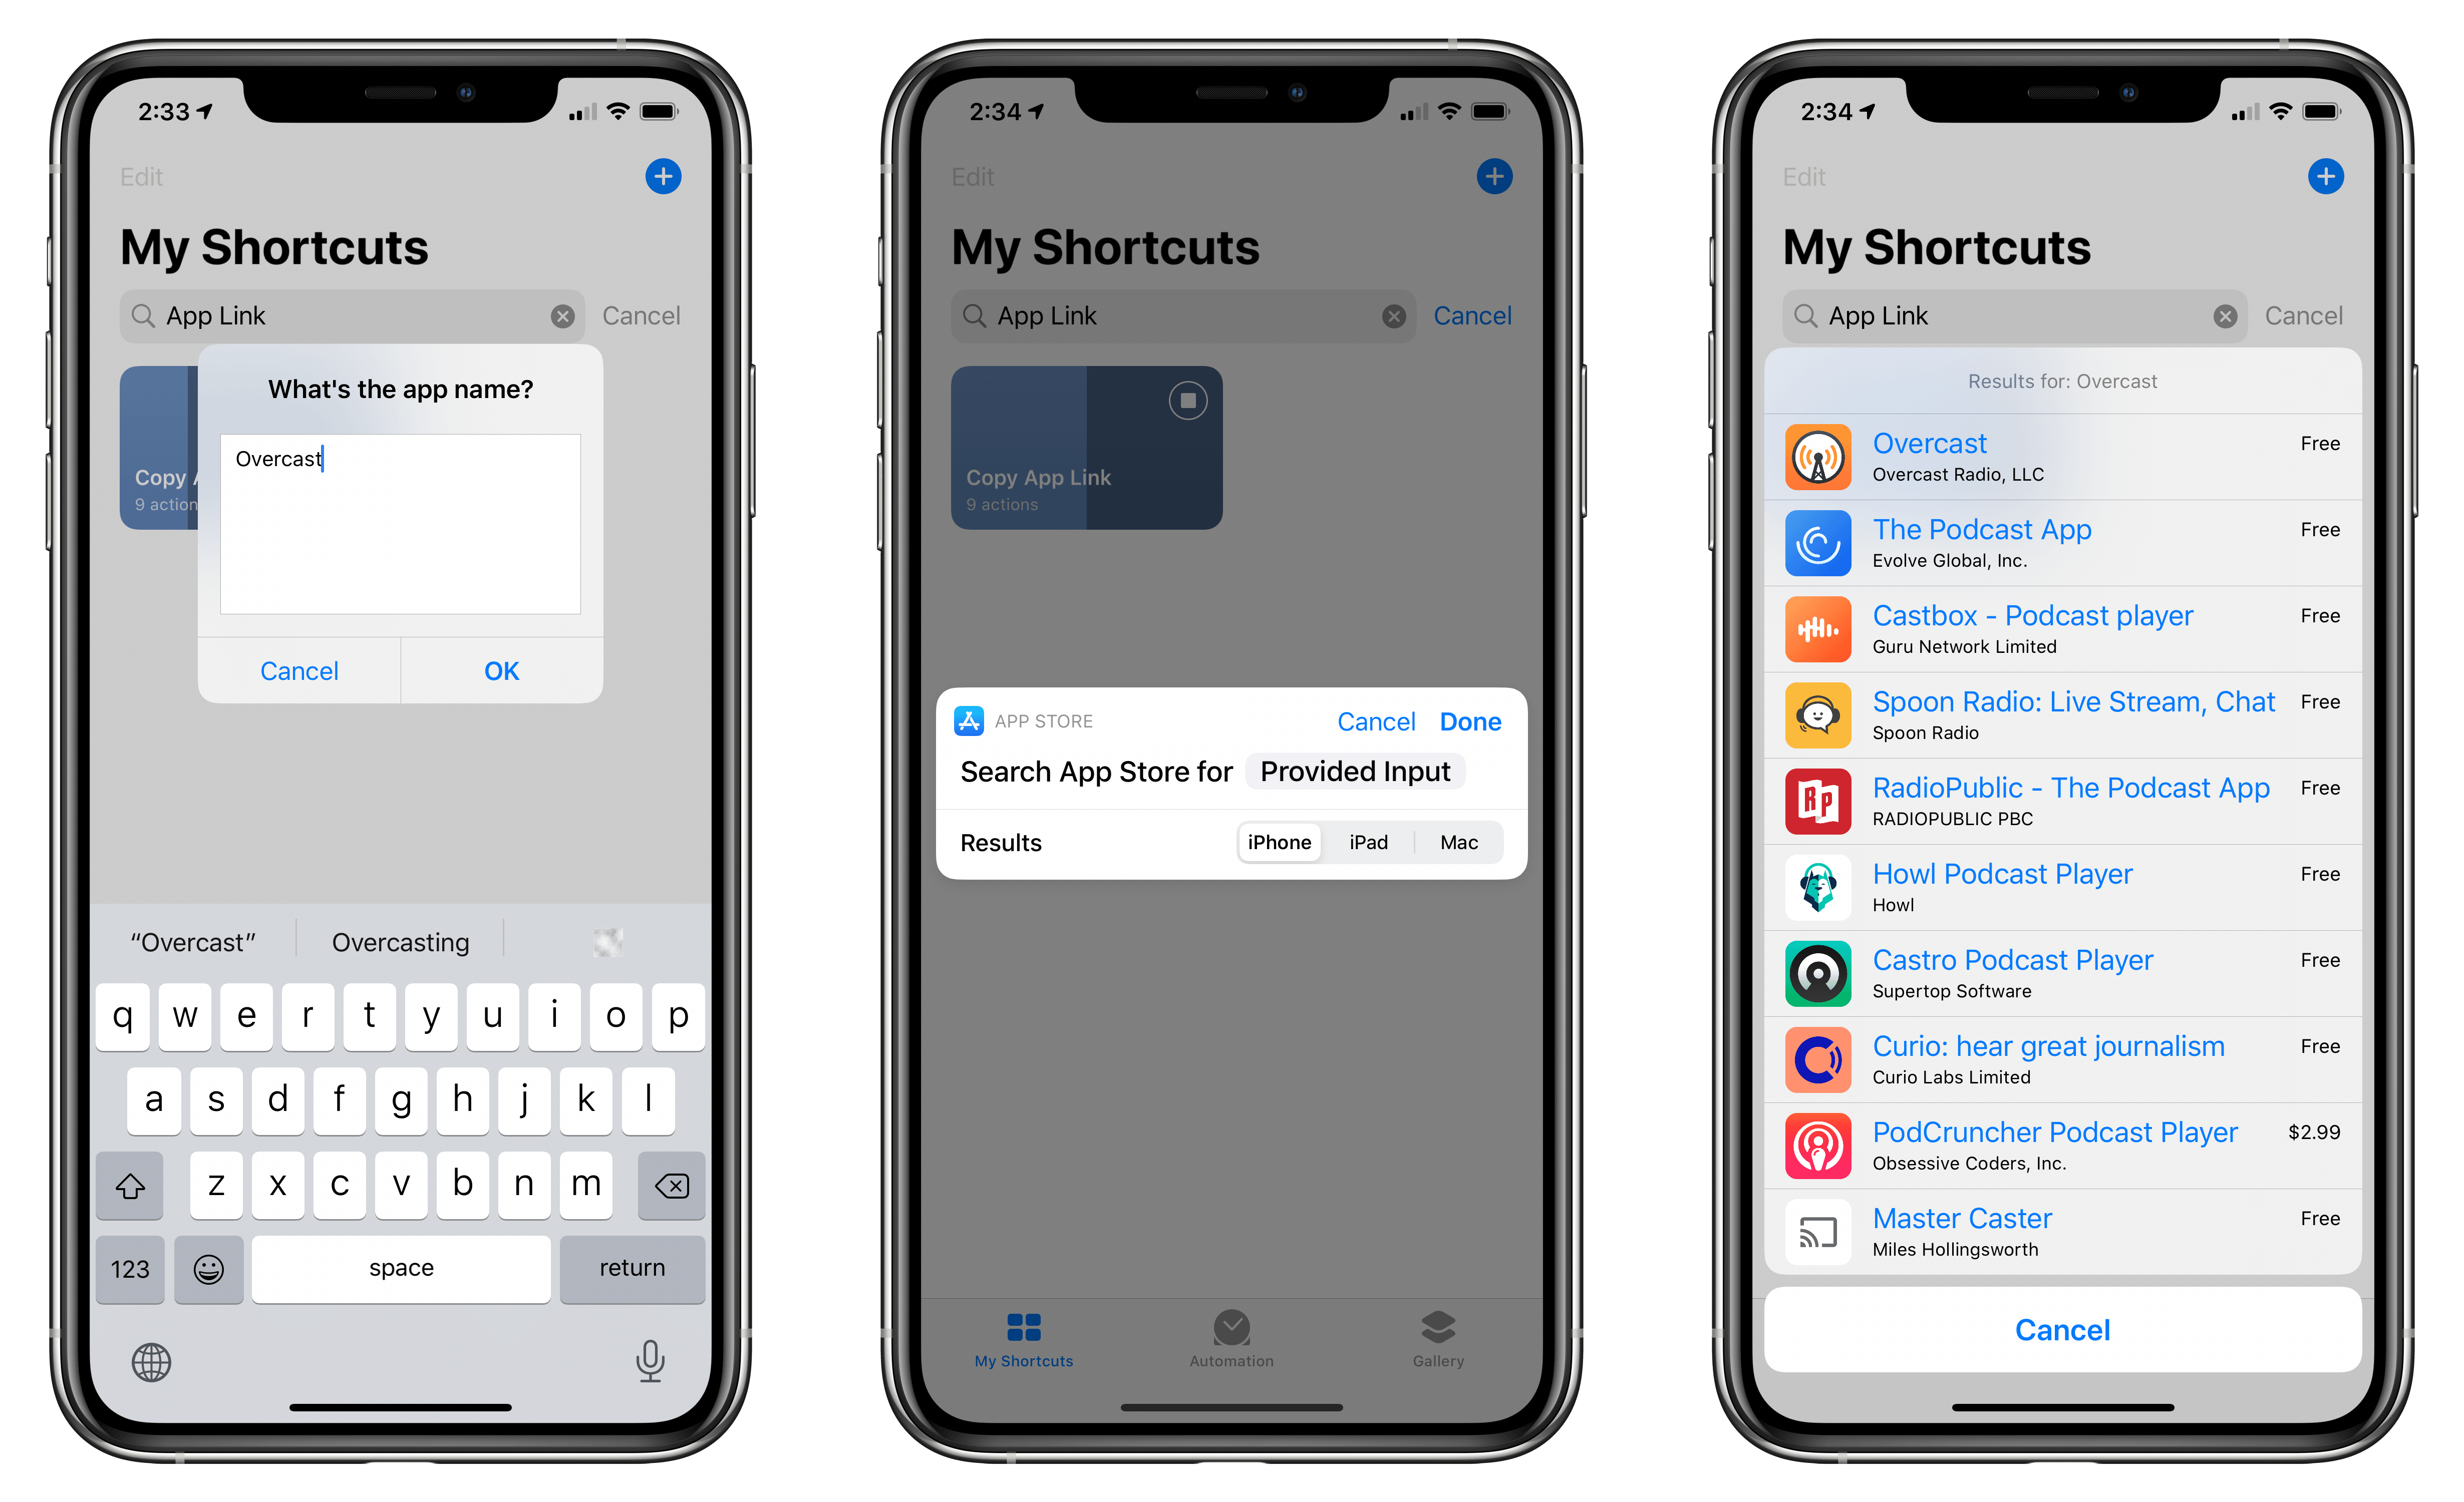 Searching the App Store from Shortcuts.